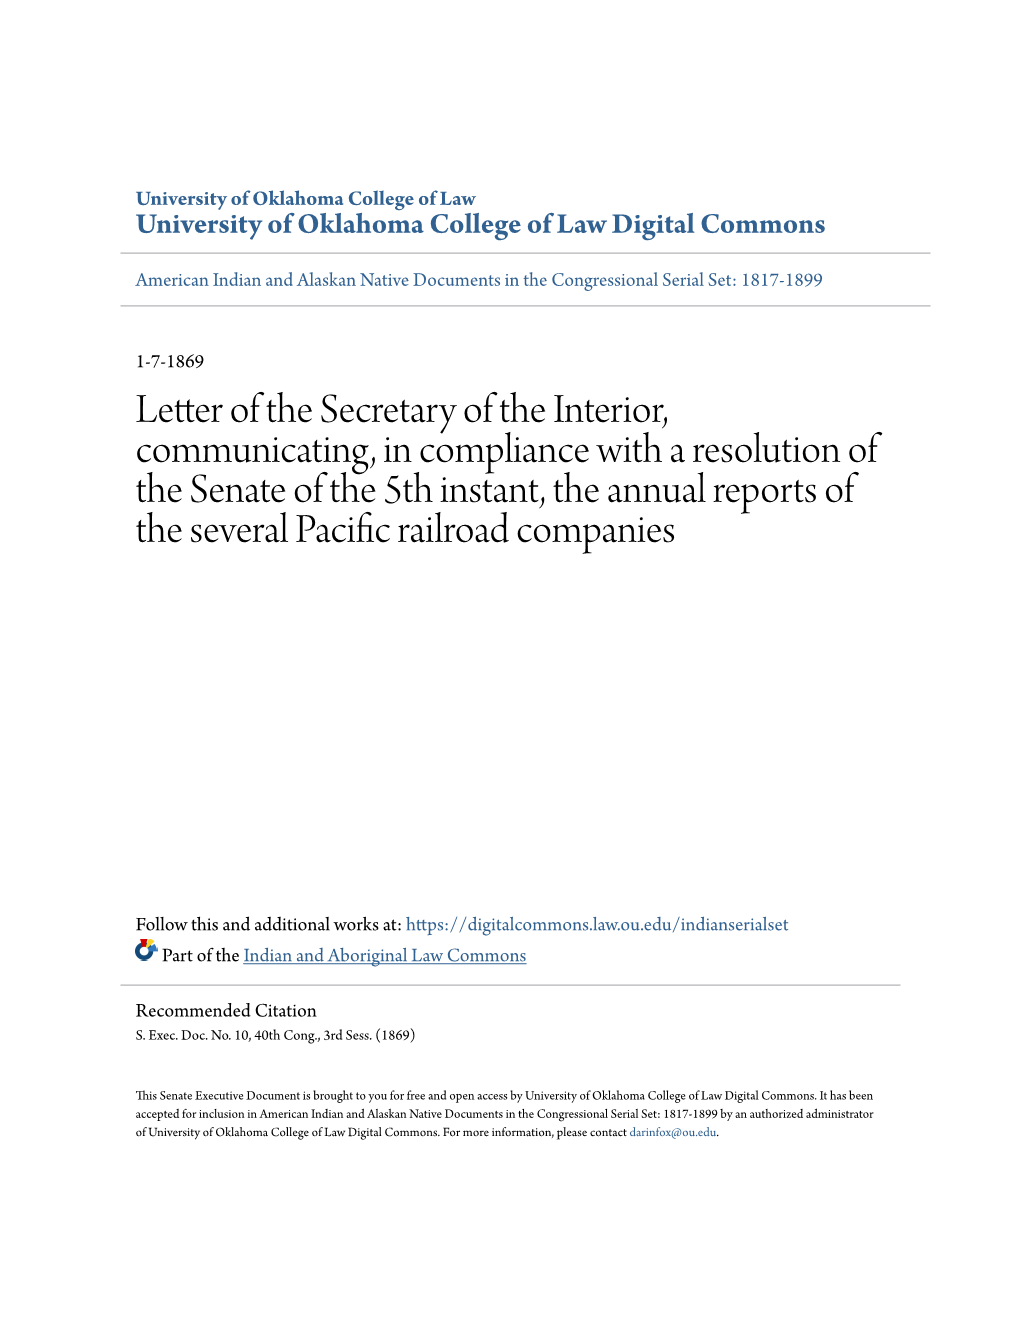 Letter of the Secretary of the Interior, Communicating, in Compliance with a Resolution of the Senate of the 5Th Instant, the An